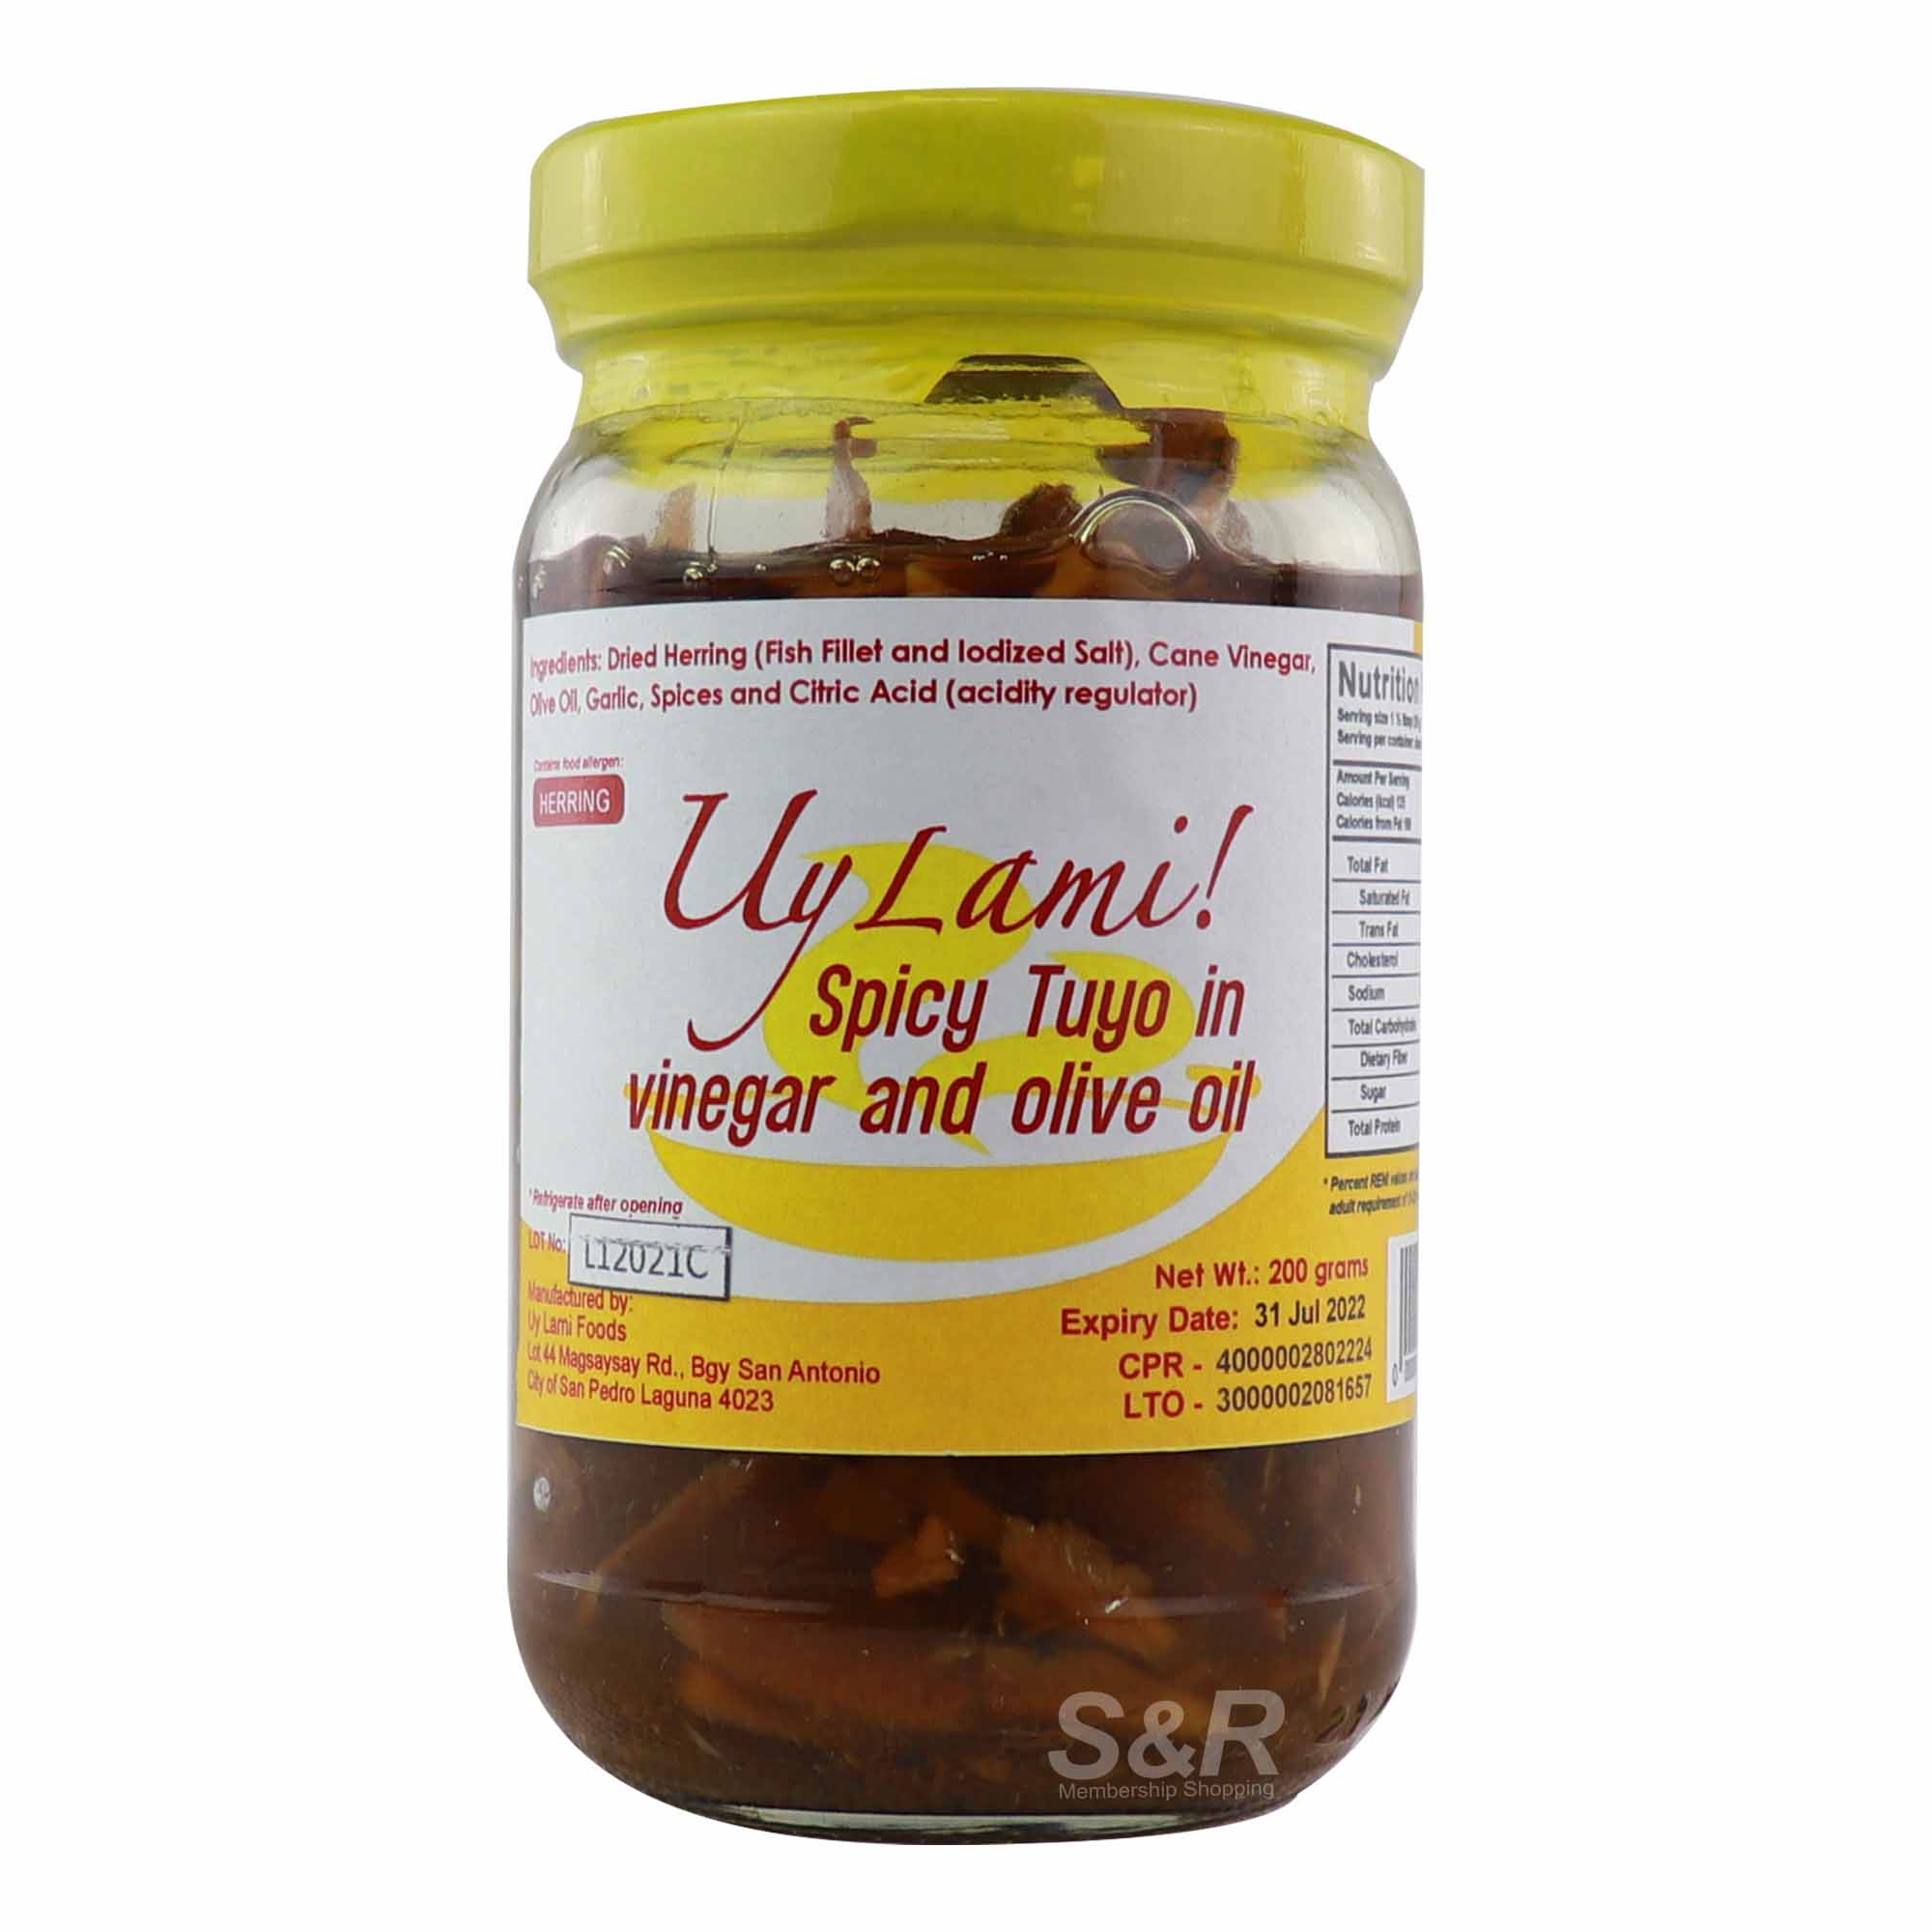 Uy Lami! Spicy Tuyo in Vinegar and Olive Oil 200g